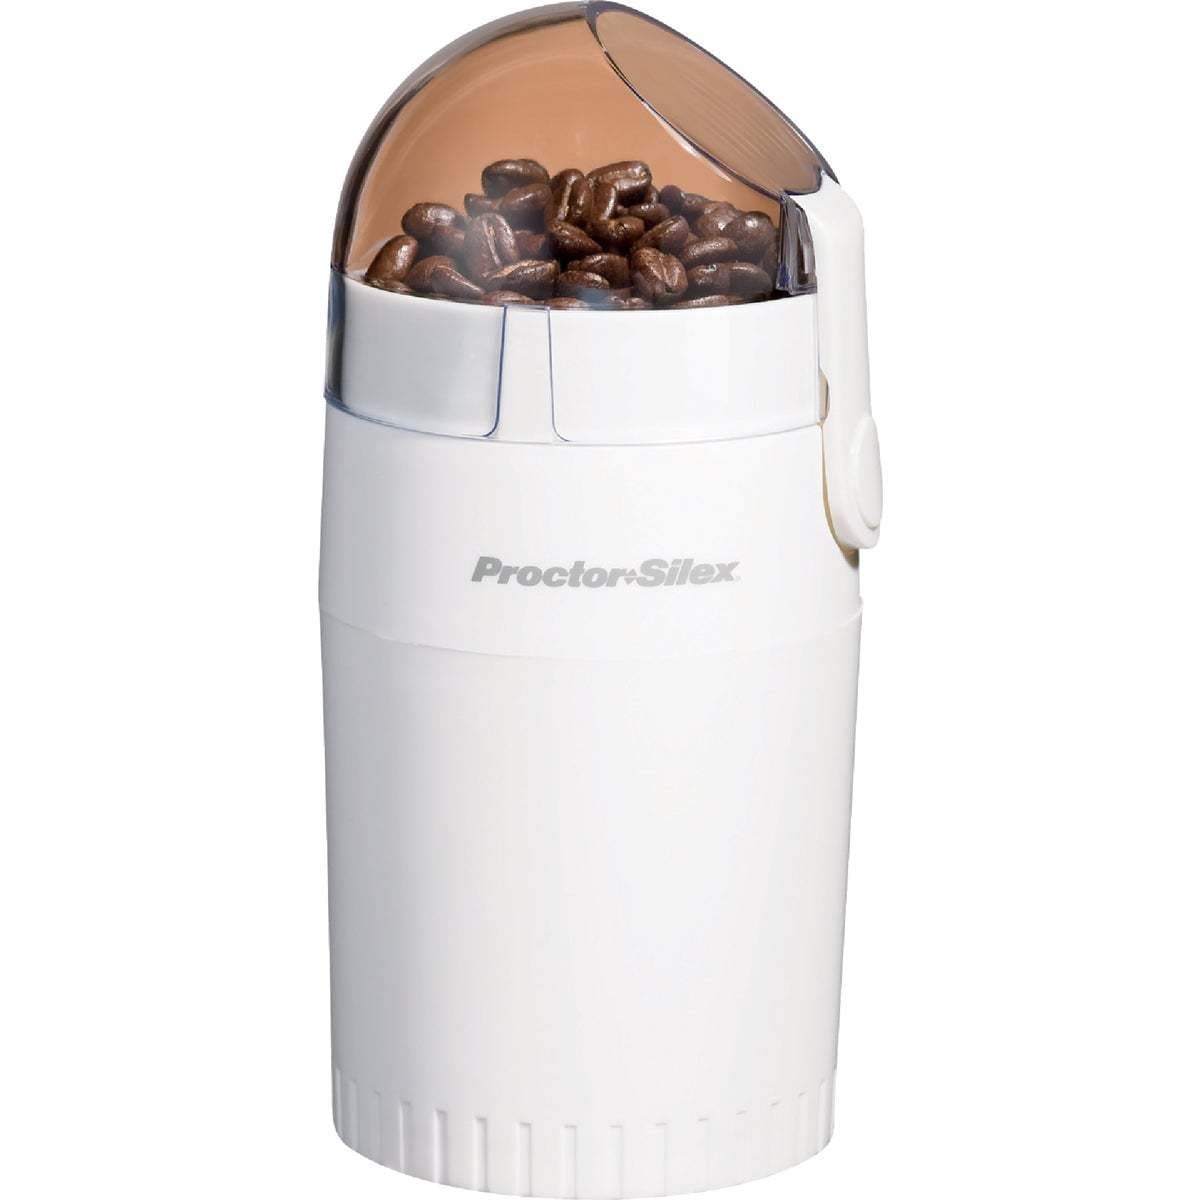 Hamilton Beach Fresh Grind Electric Coffee Grinder For Beans Spices And  More